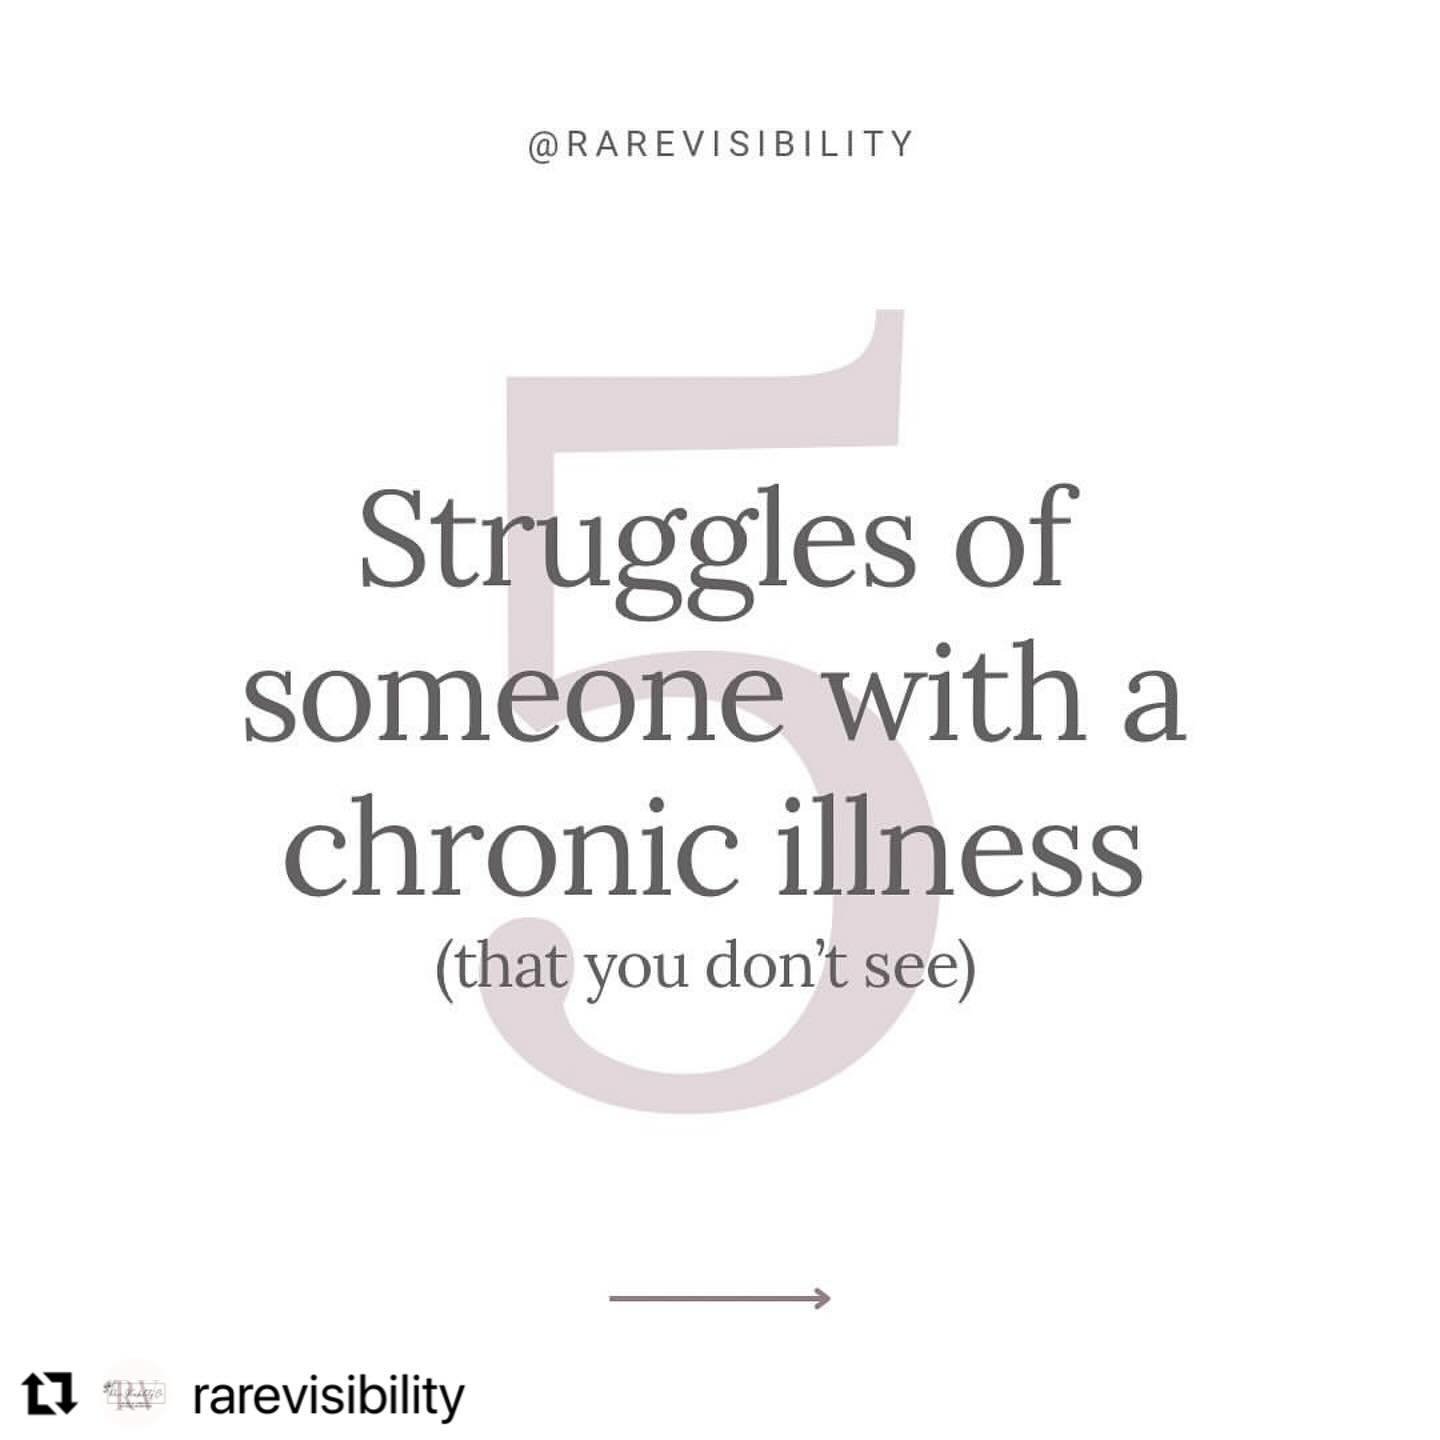 #Repost @rarevisibility with @use.repost
・・・
Struggles of someone with a chronic illness that you probably don&rsquo;t see ⤵️

🙌🏻 We are in constant fear of flare up&rsquo;s and do everything we can to avoid them - even if that means making sacrifi